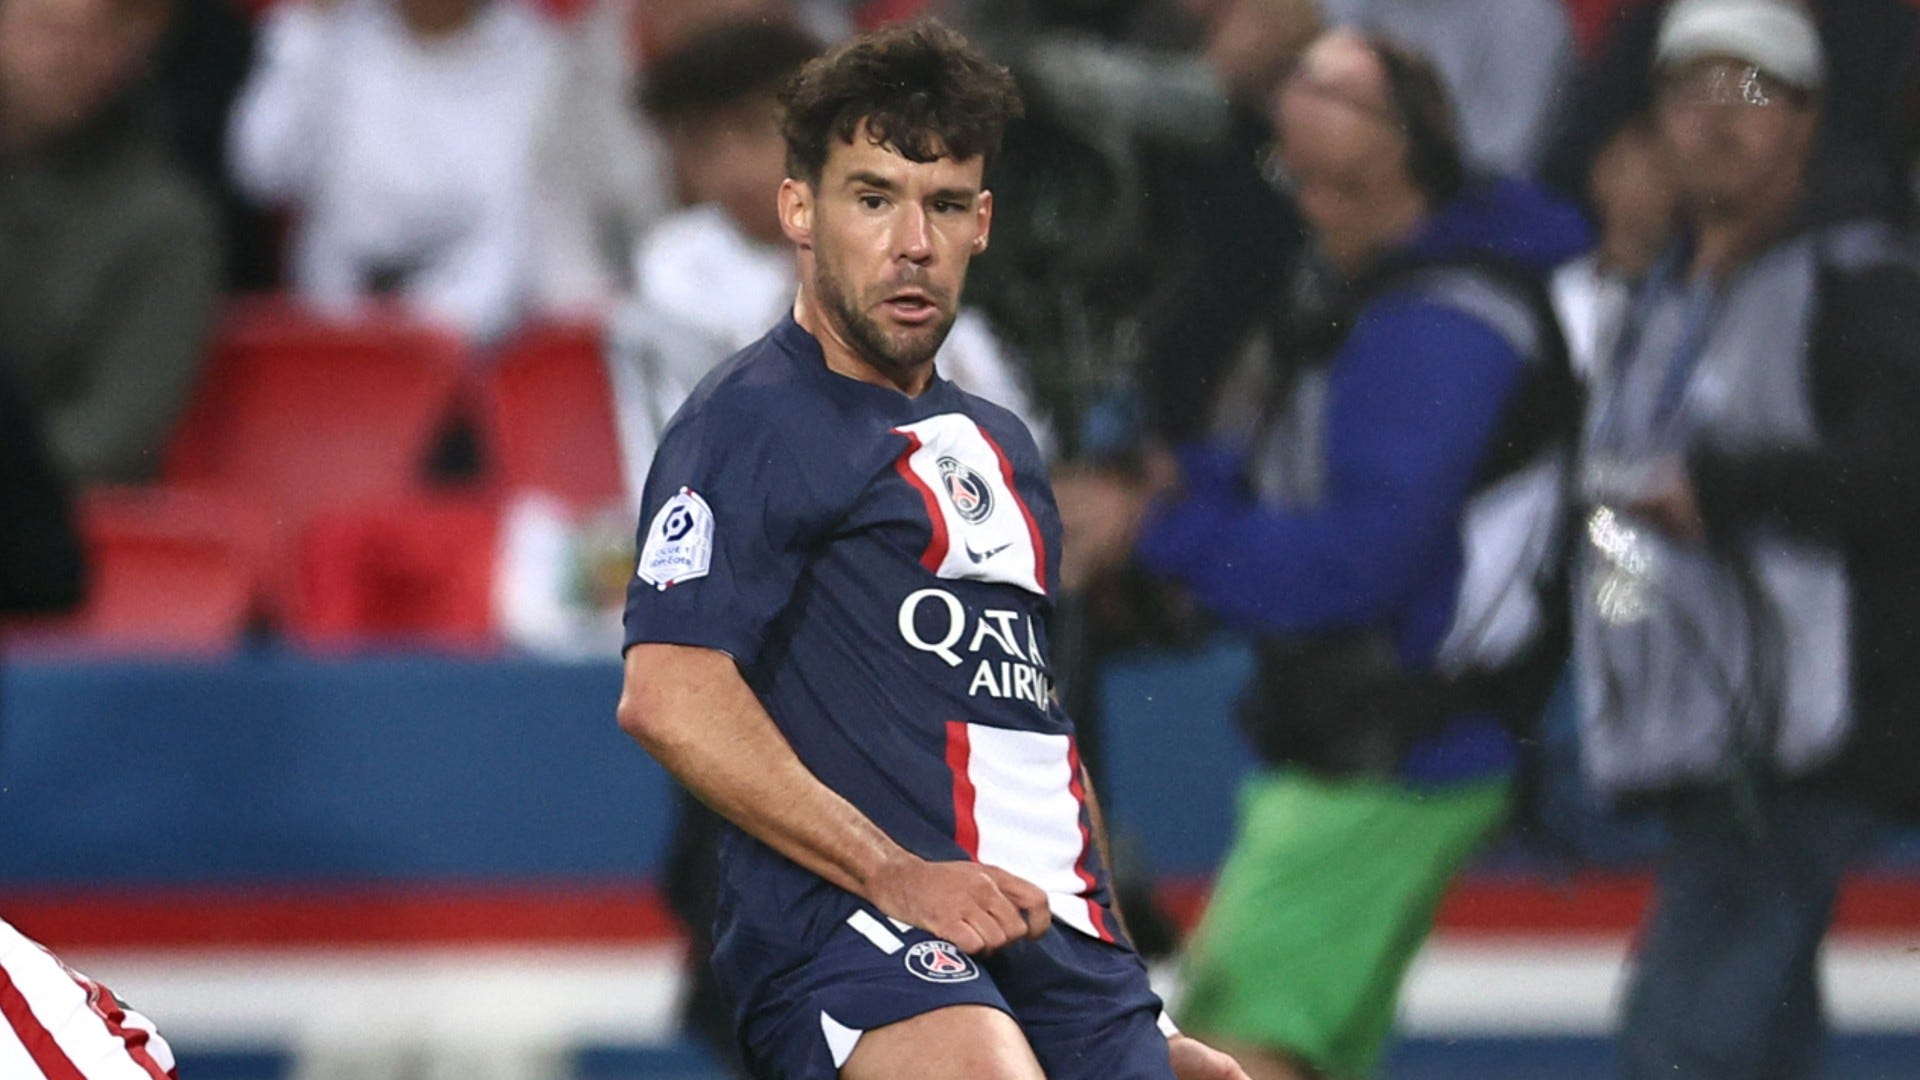 Report: Bernat Not Expected to Feature Again for PSG This Season